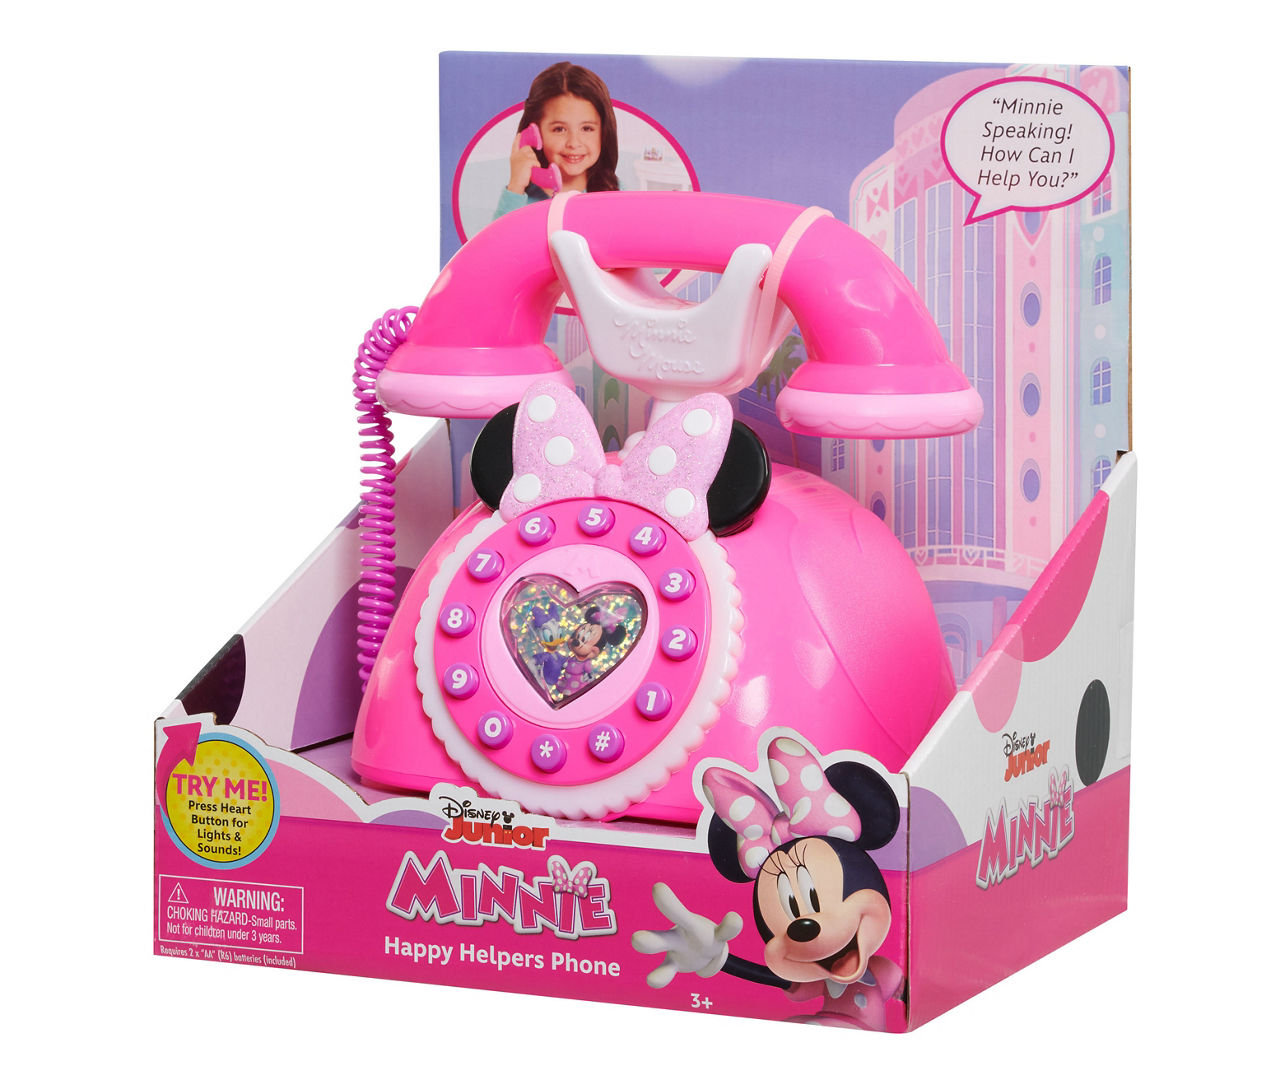 Minnie Mouse Happy Helpers Toy Phone - Pink Lights and Sound Tested  886144893575